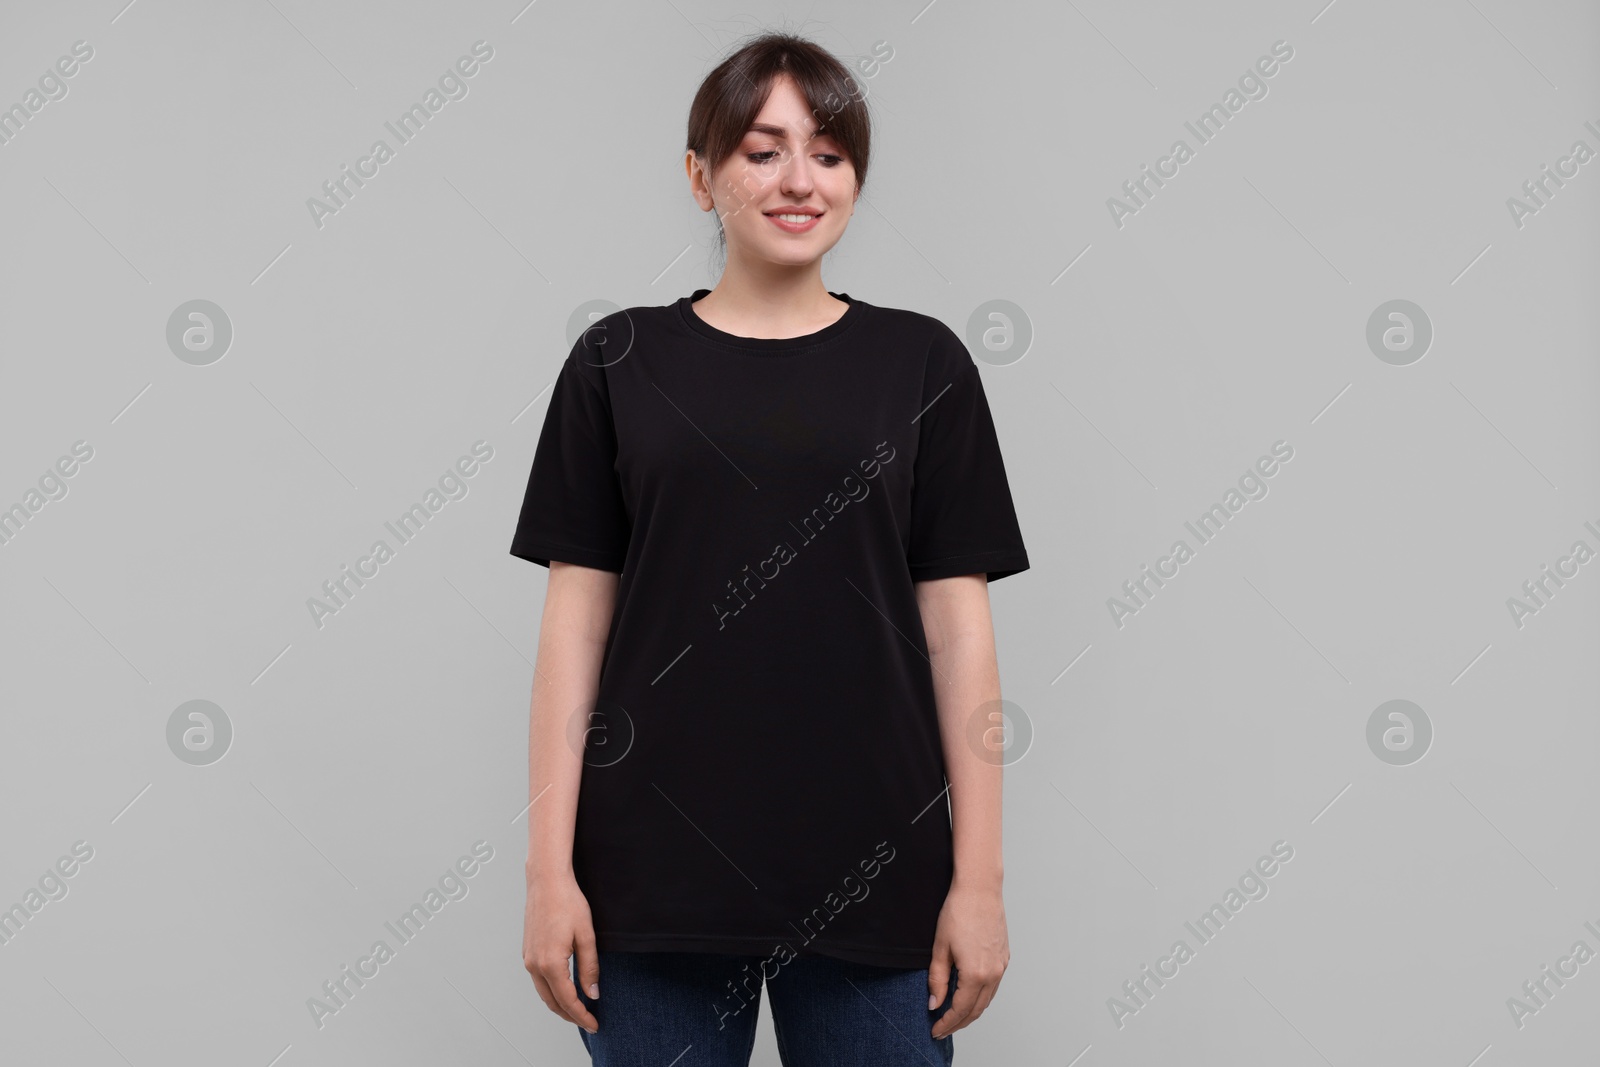 Photo of Smiling woman in stylish black t-shirt on light grey background